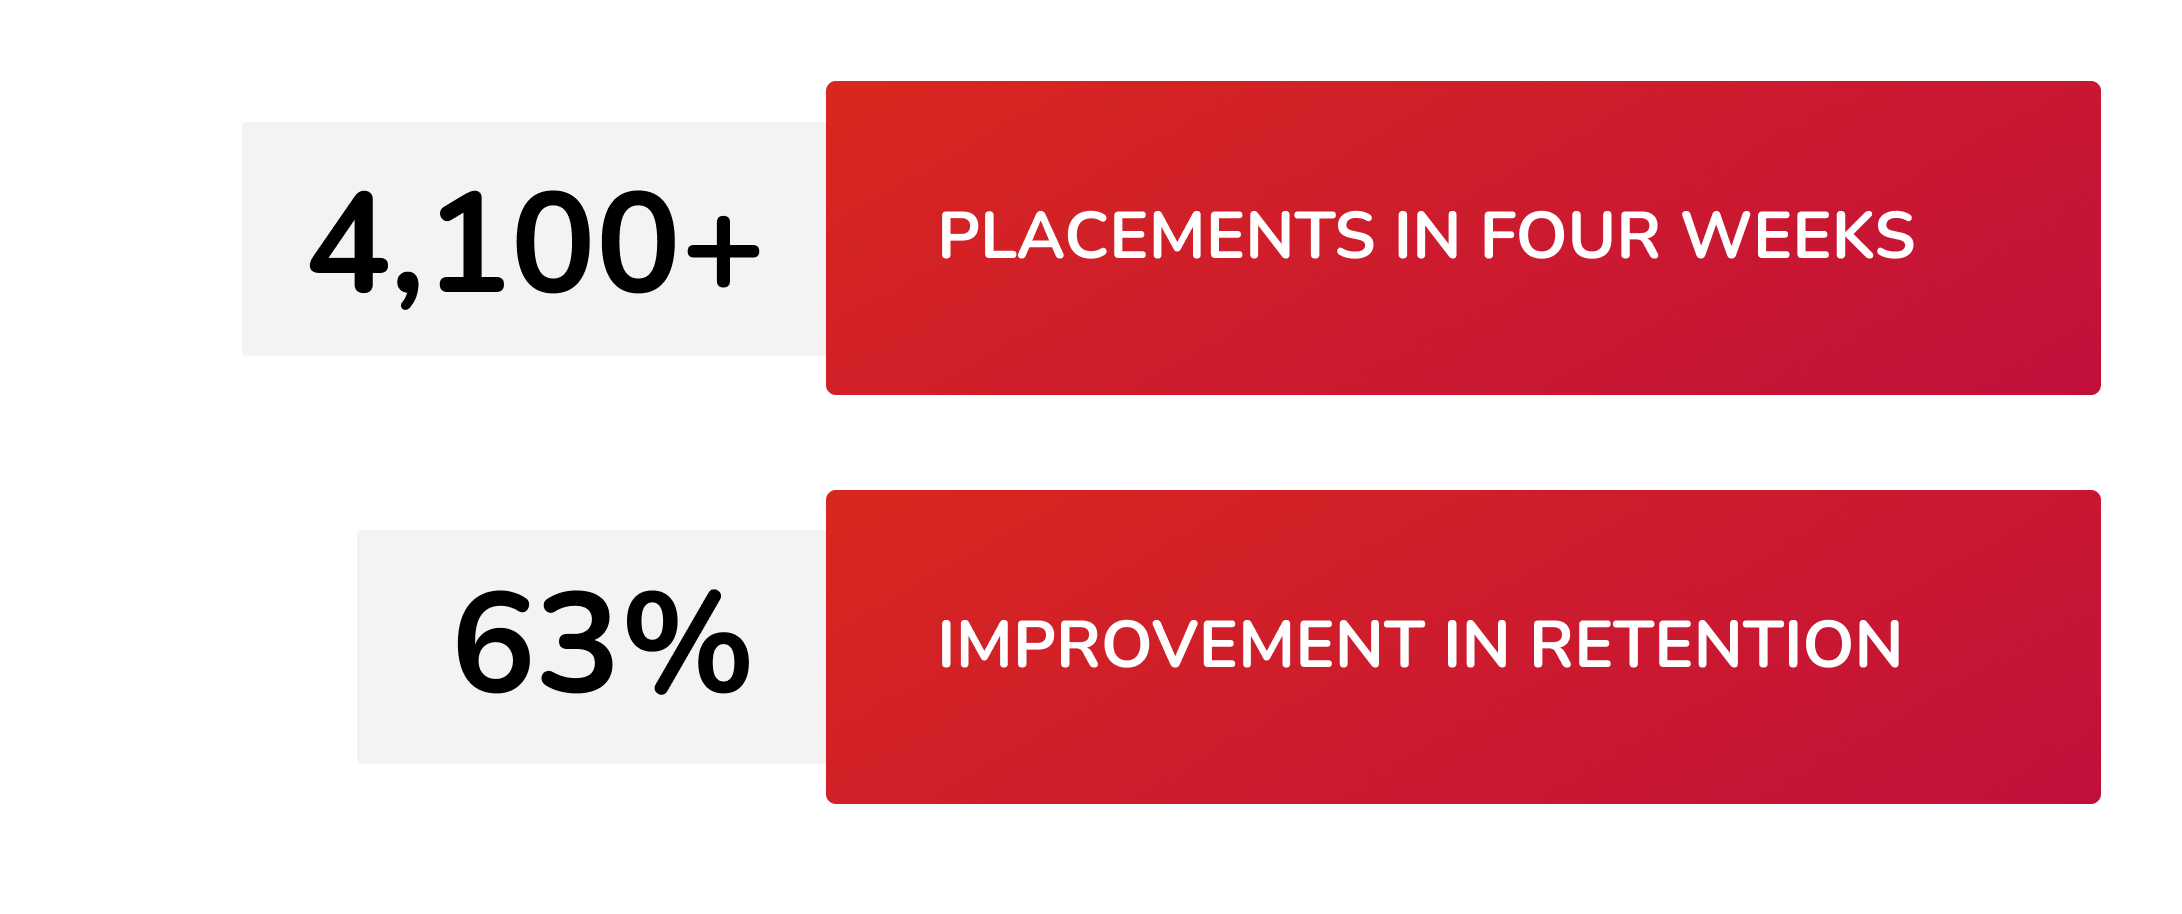 More than 4,100 placements in four weeks, 63% improvement in retention